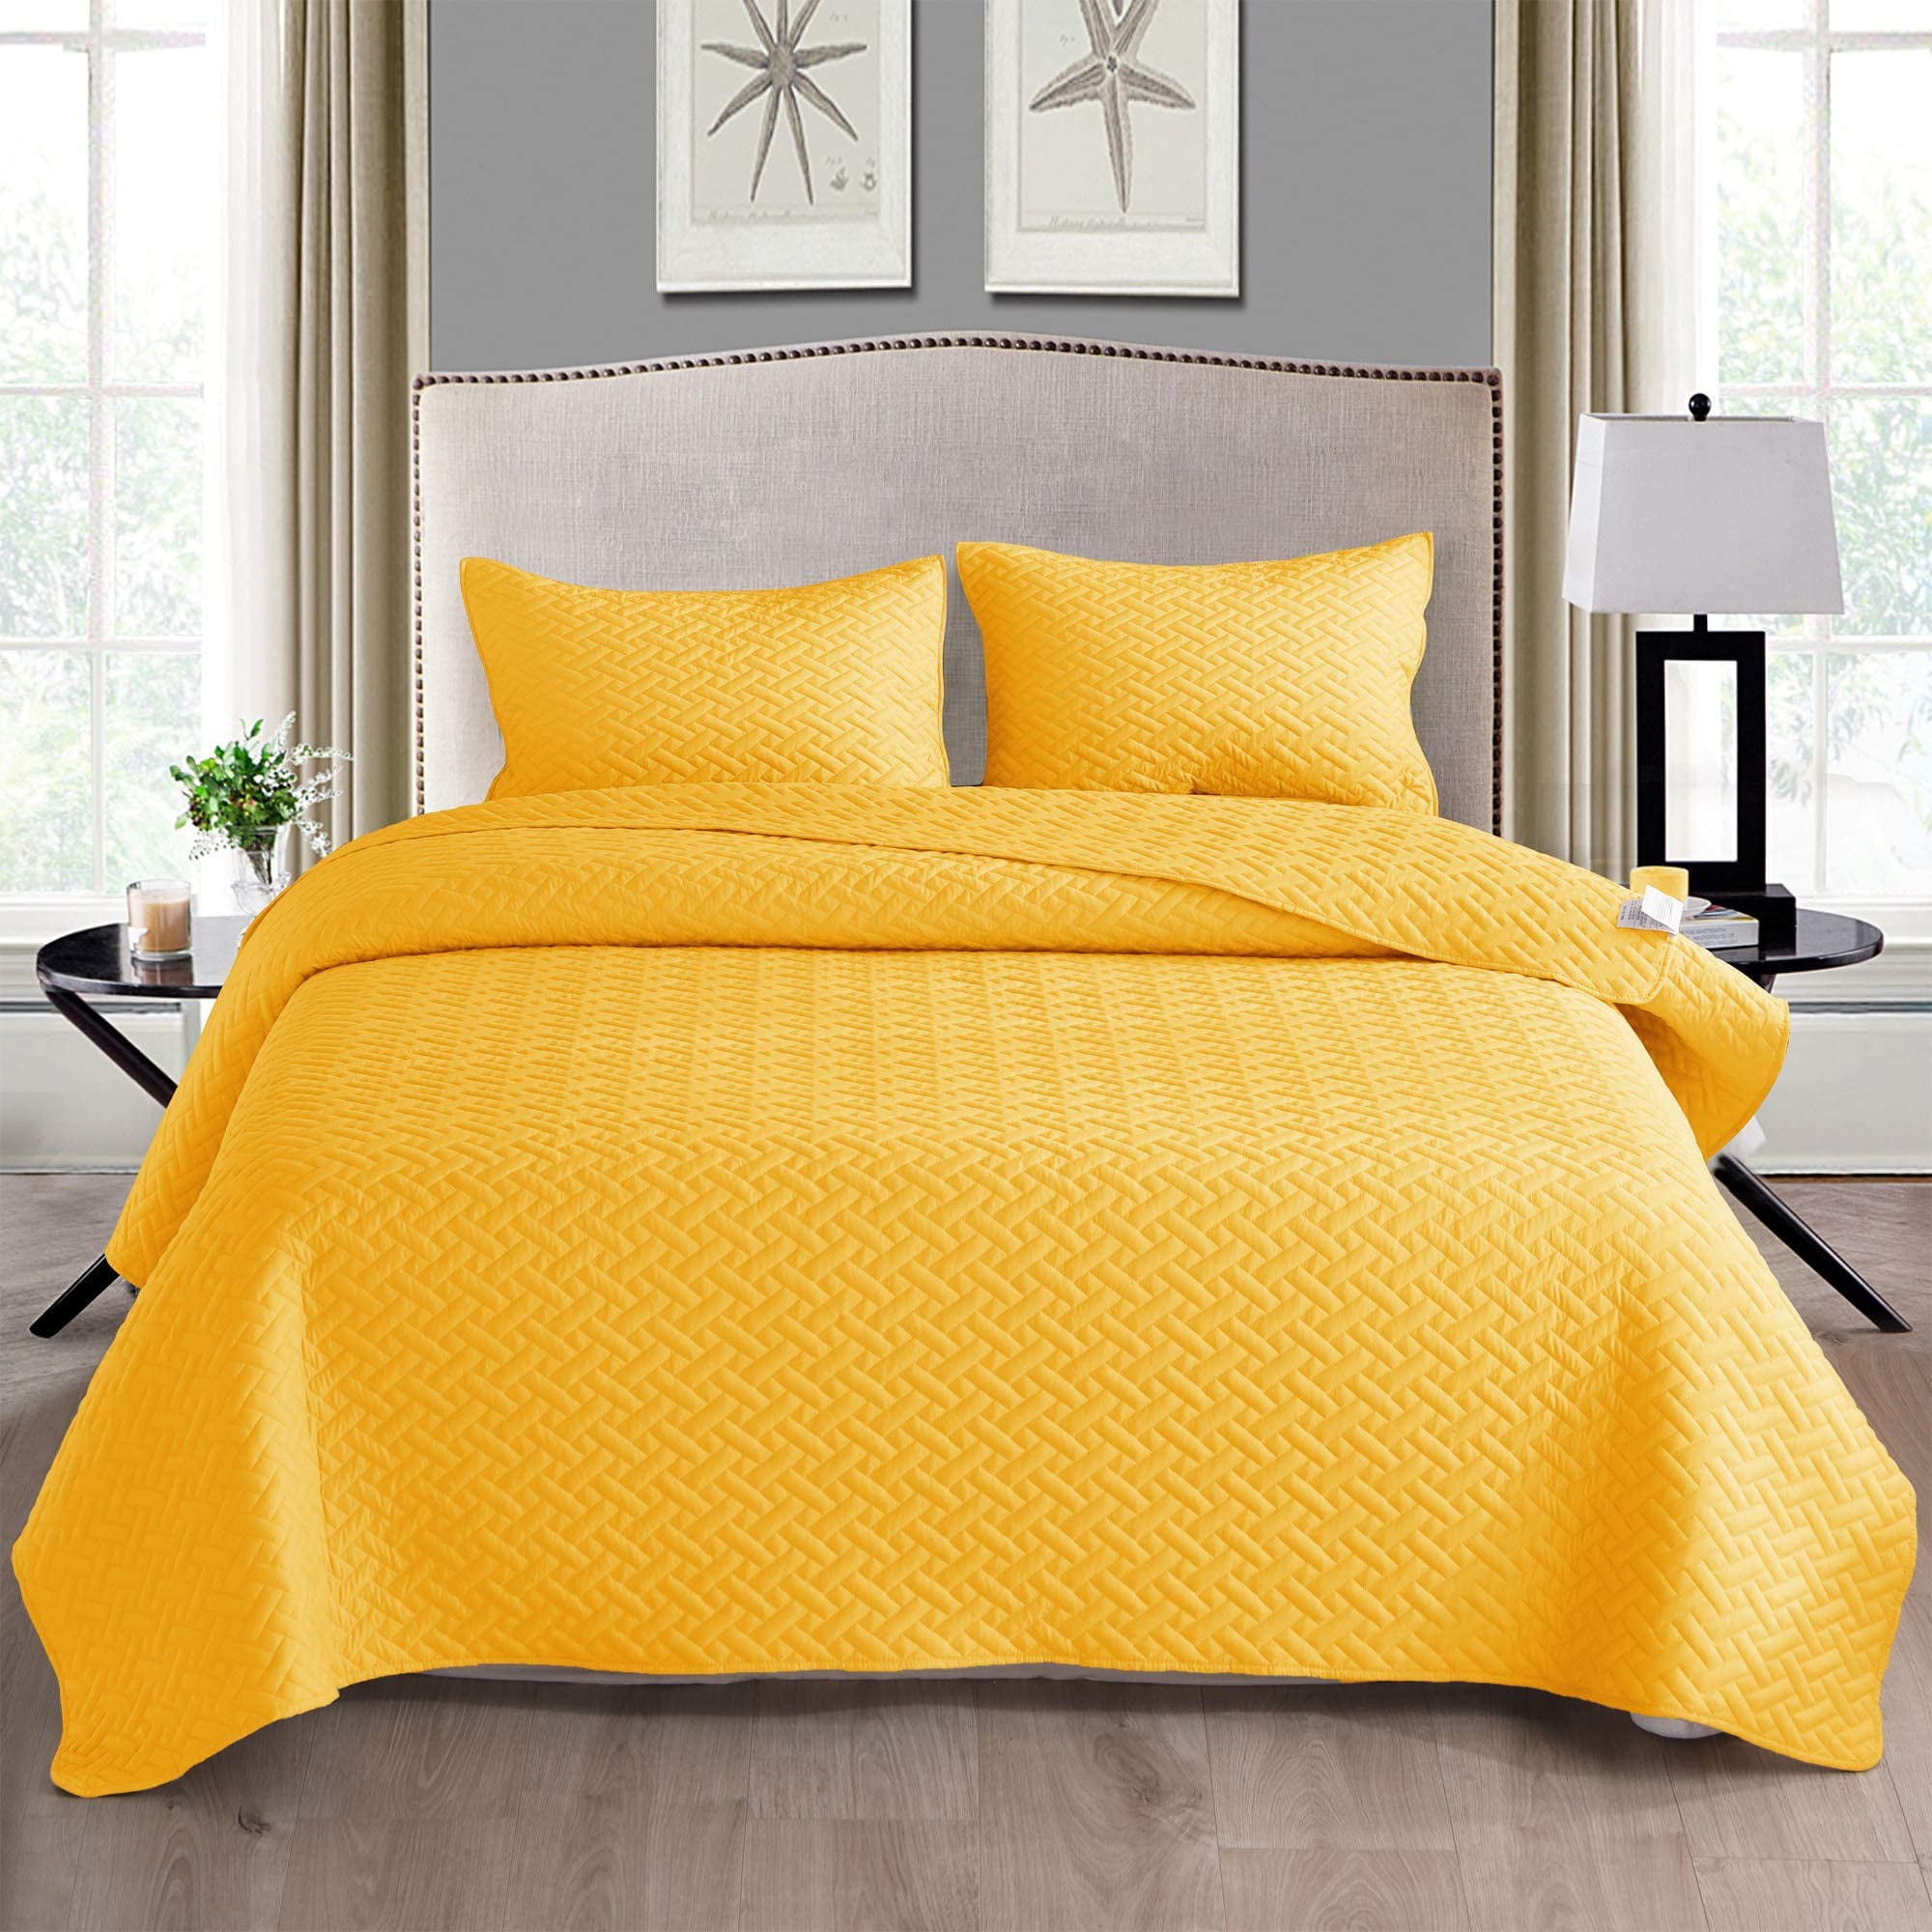 ALL SIZES Details about   3pc Solid Yellow Quilted Bedspread Set AND Decorative Pillow Shams 